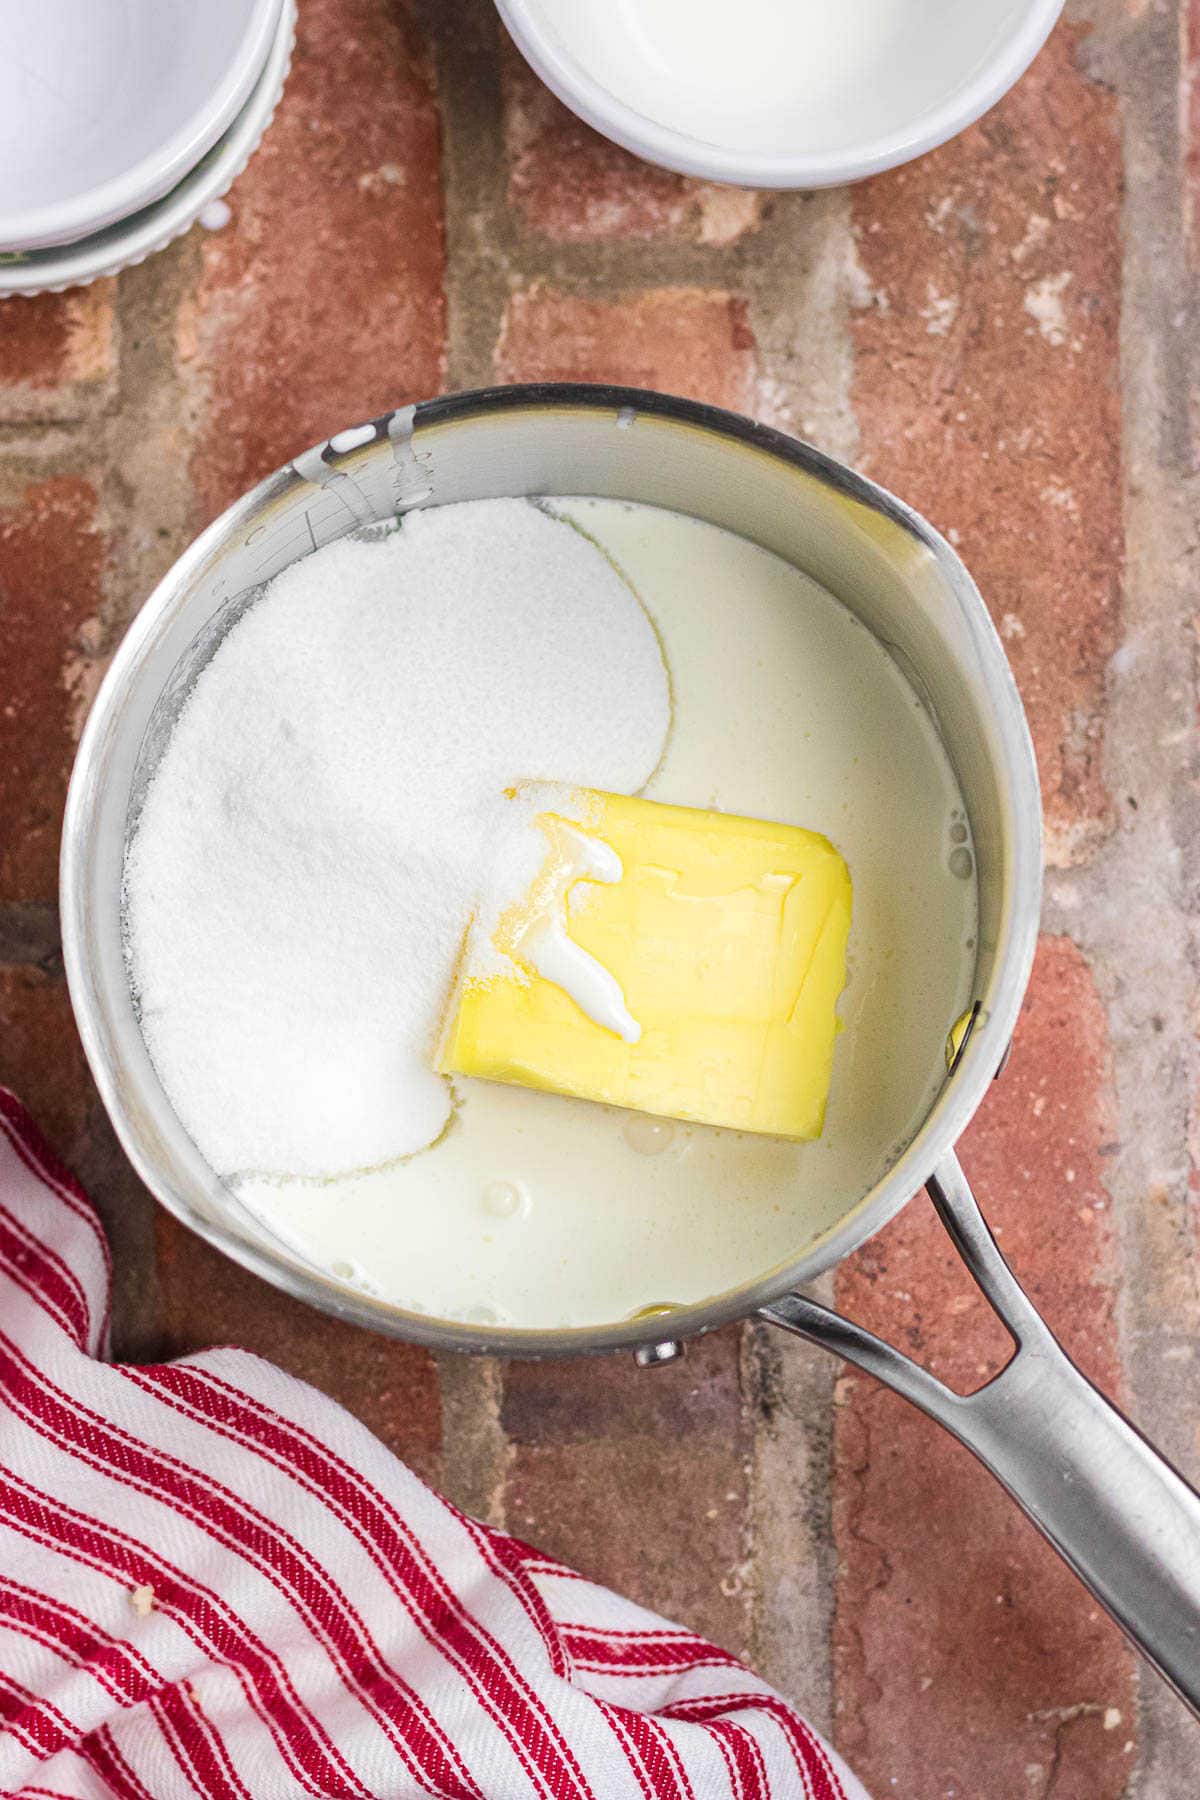 The butter, cream, and sugar in a saucepan.